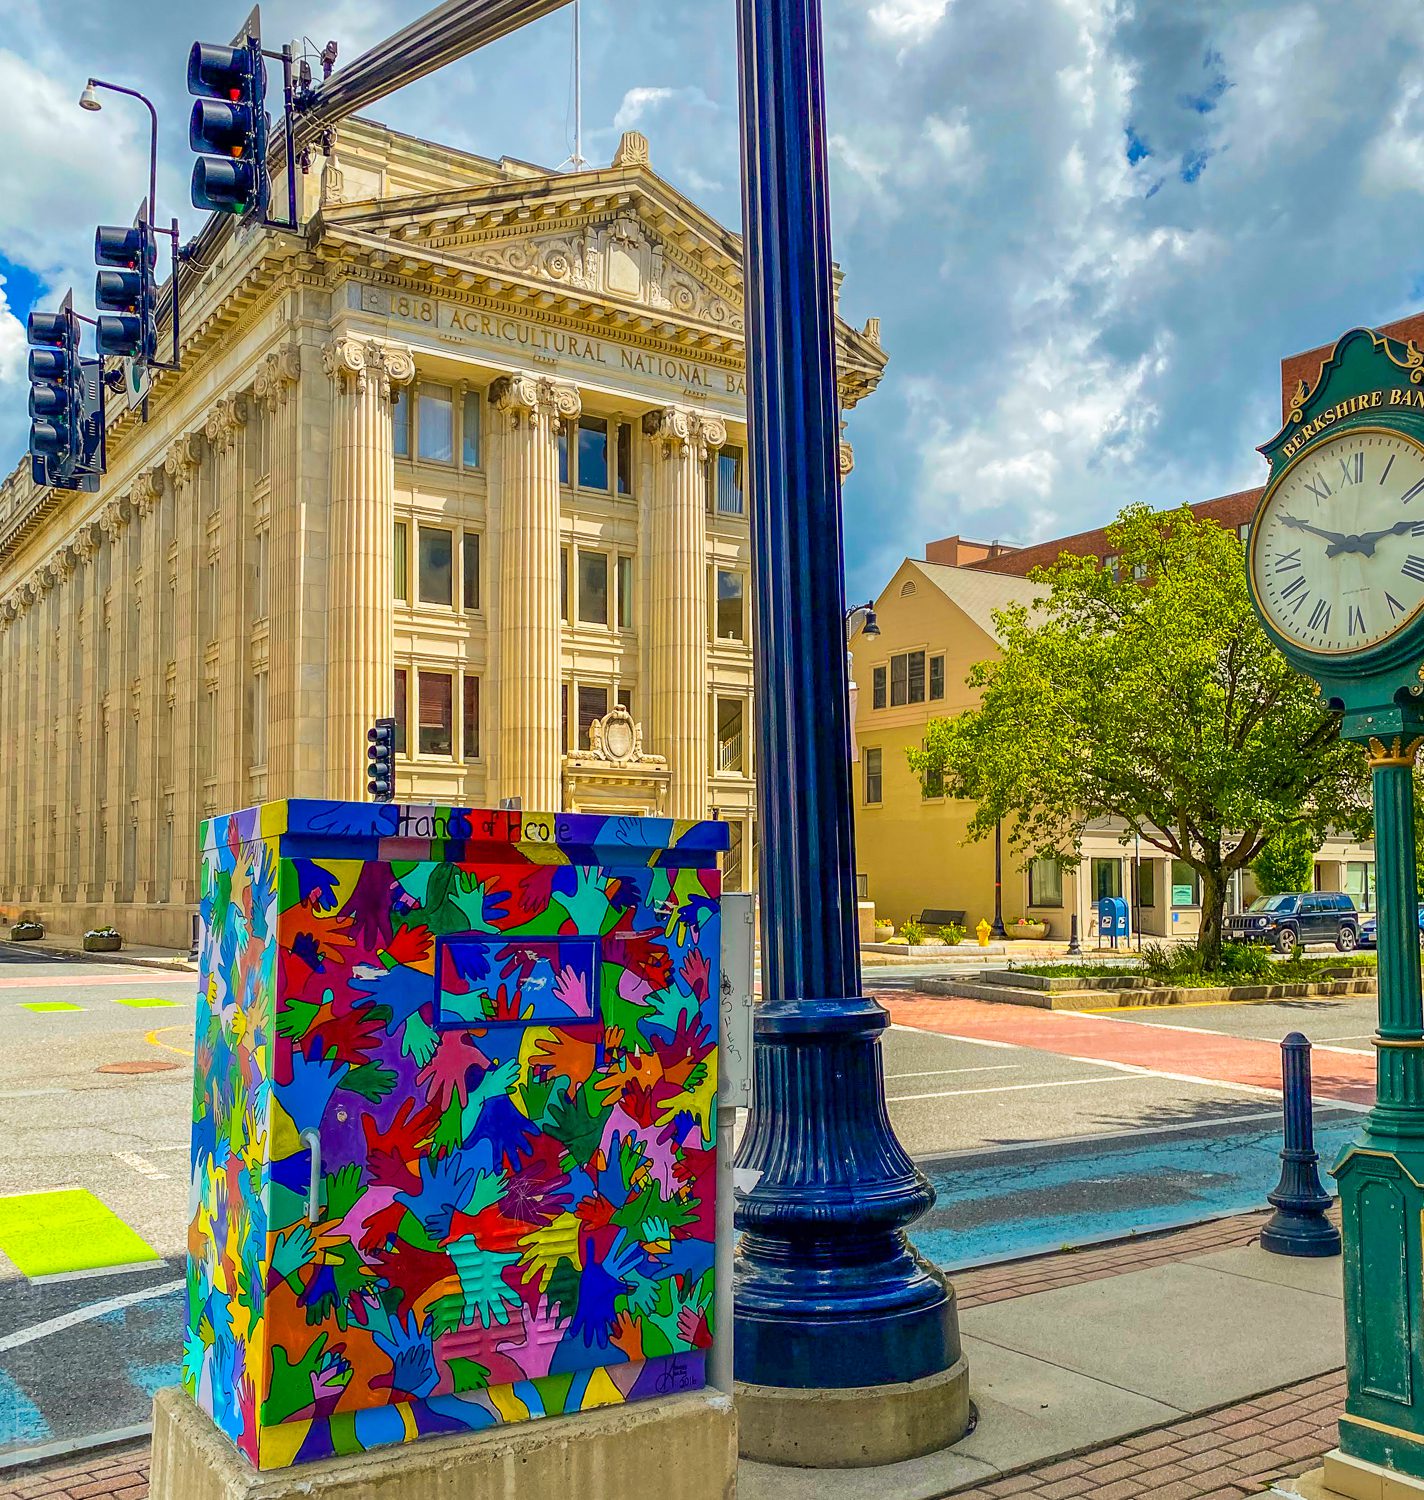 Public art and an old fashioned clock in front of First Agricultural Bank.